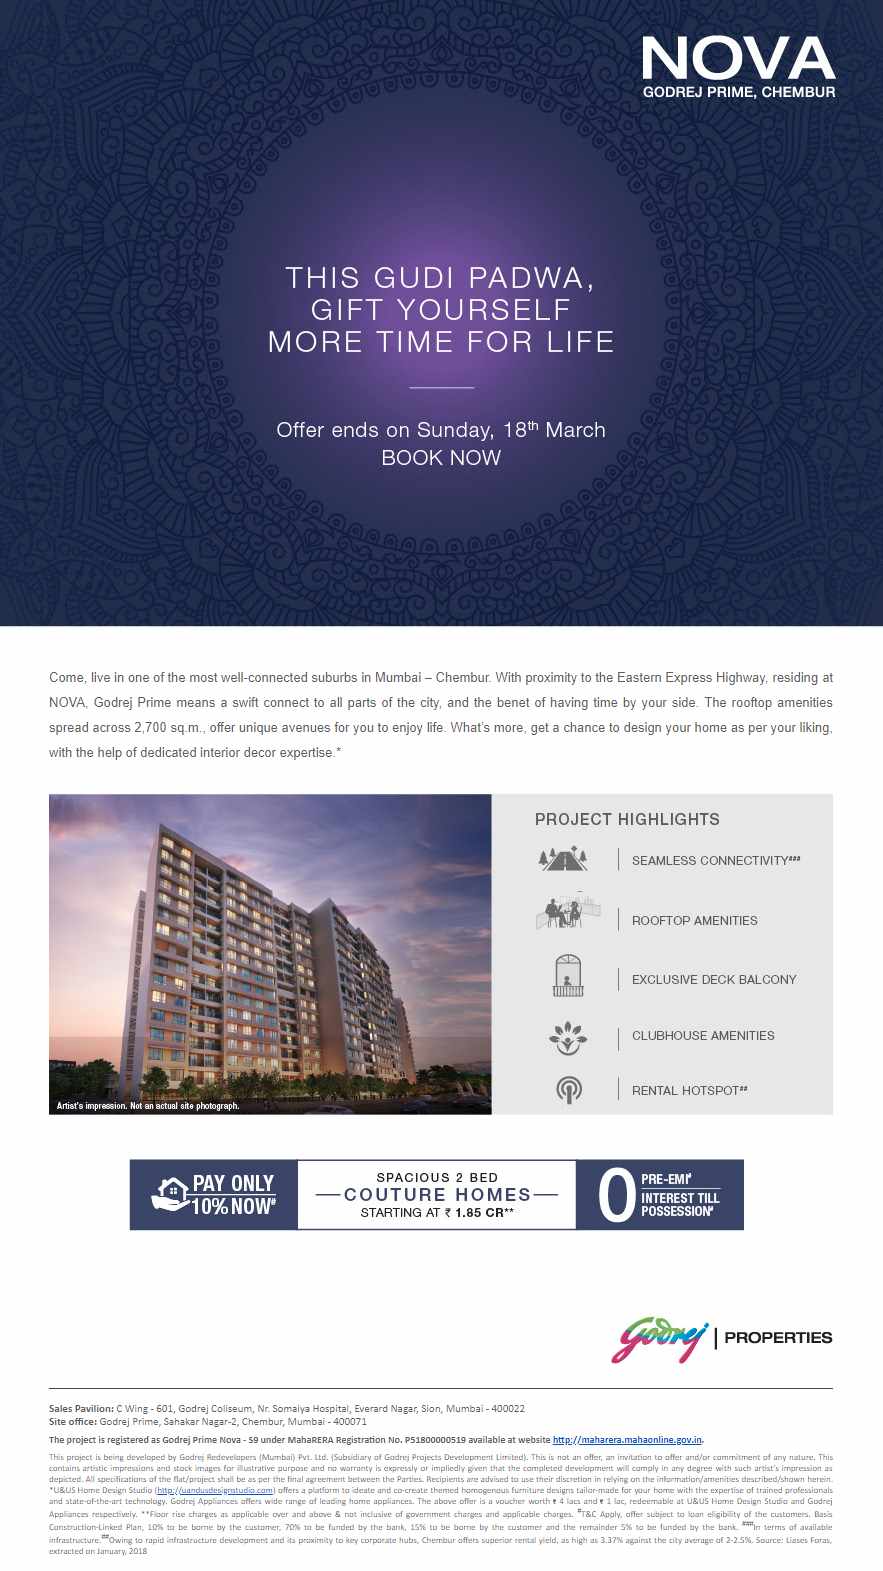 Pay only 10% now to book your home at Godrej Prime Nova in Mumbai Update